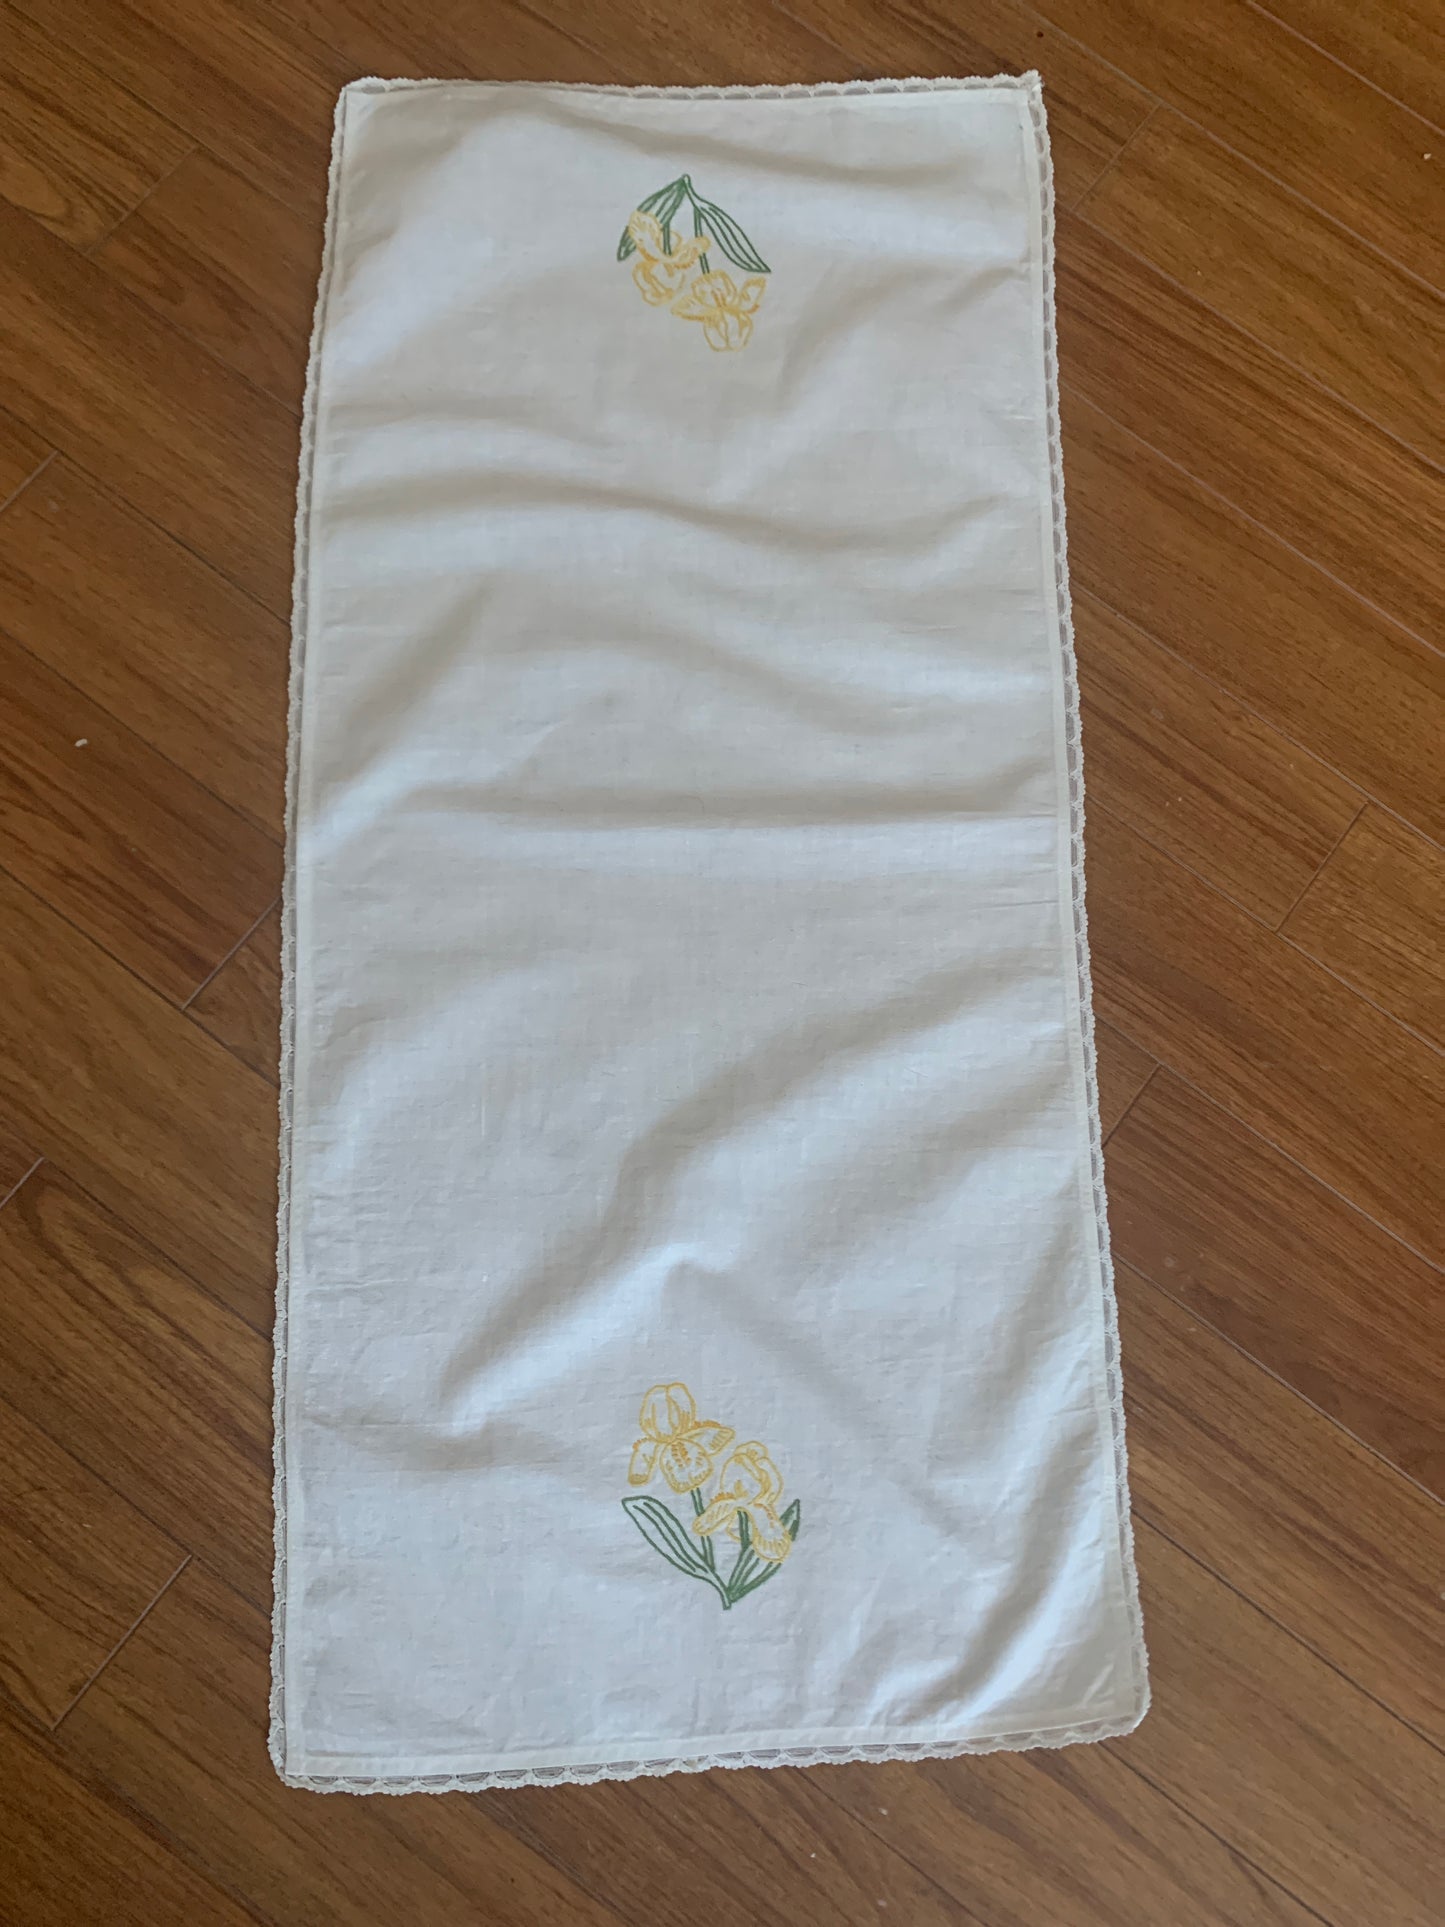 Vintage Embroidered Table Runner Yellow Iris Hand Stitched Decoration